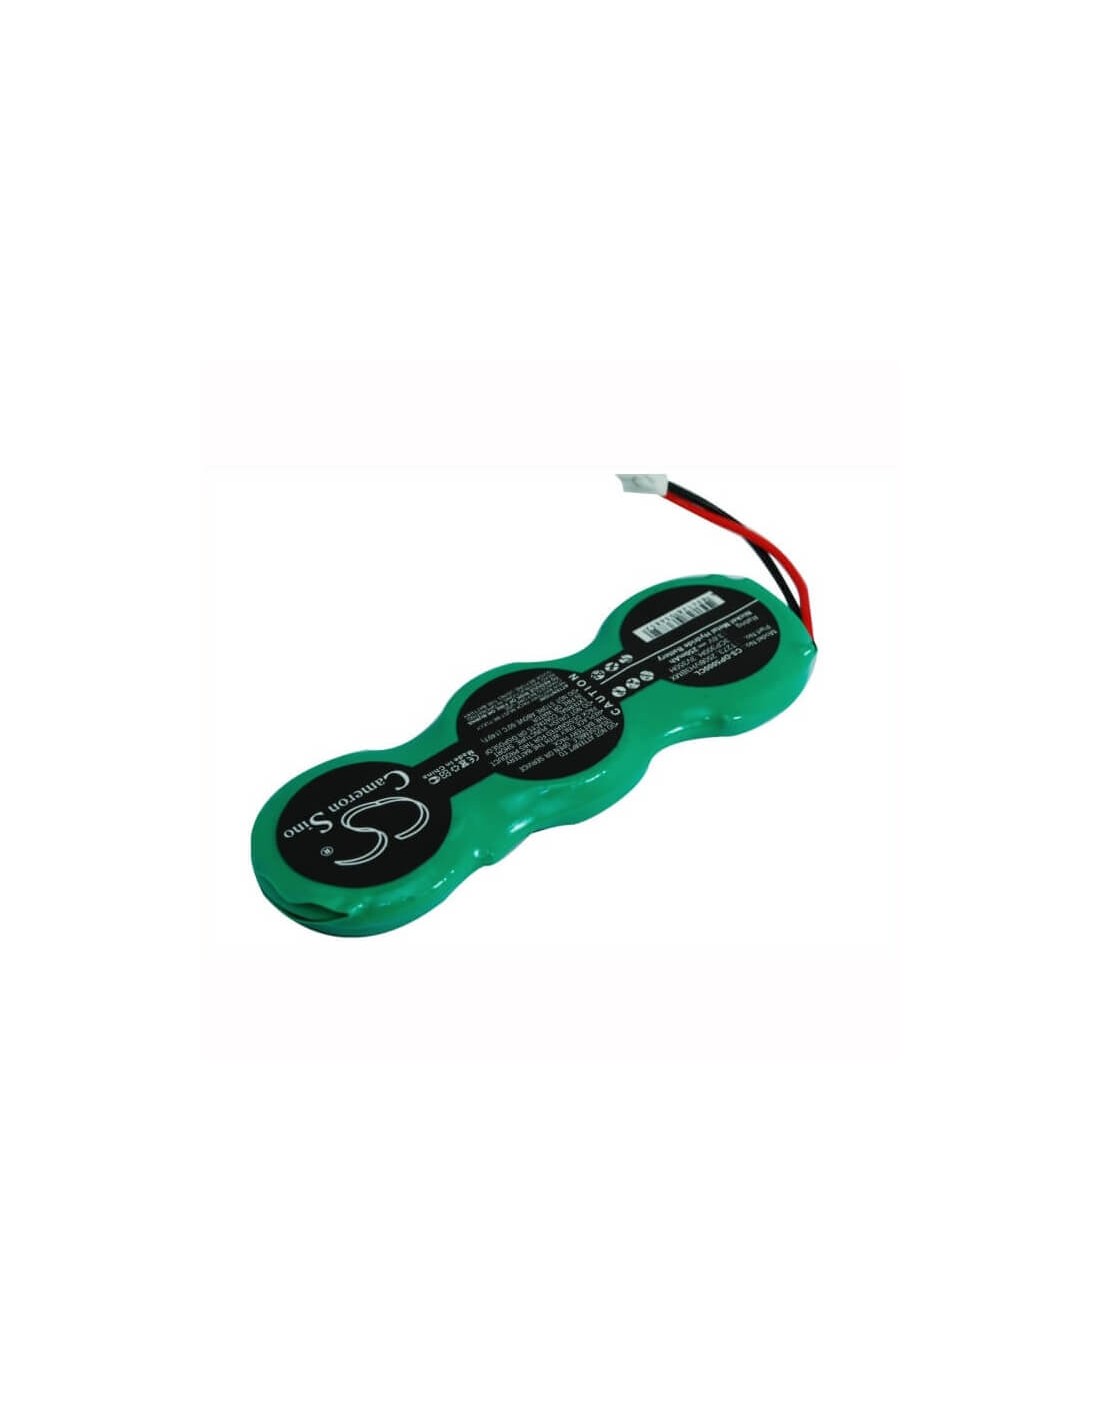 Battery for Master, Simply 3.6V, 250mAh - 0.90Wh